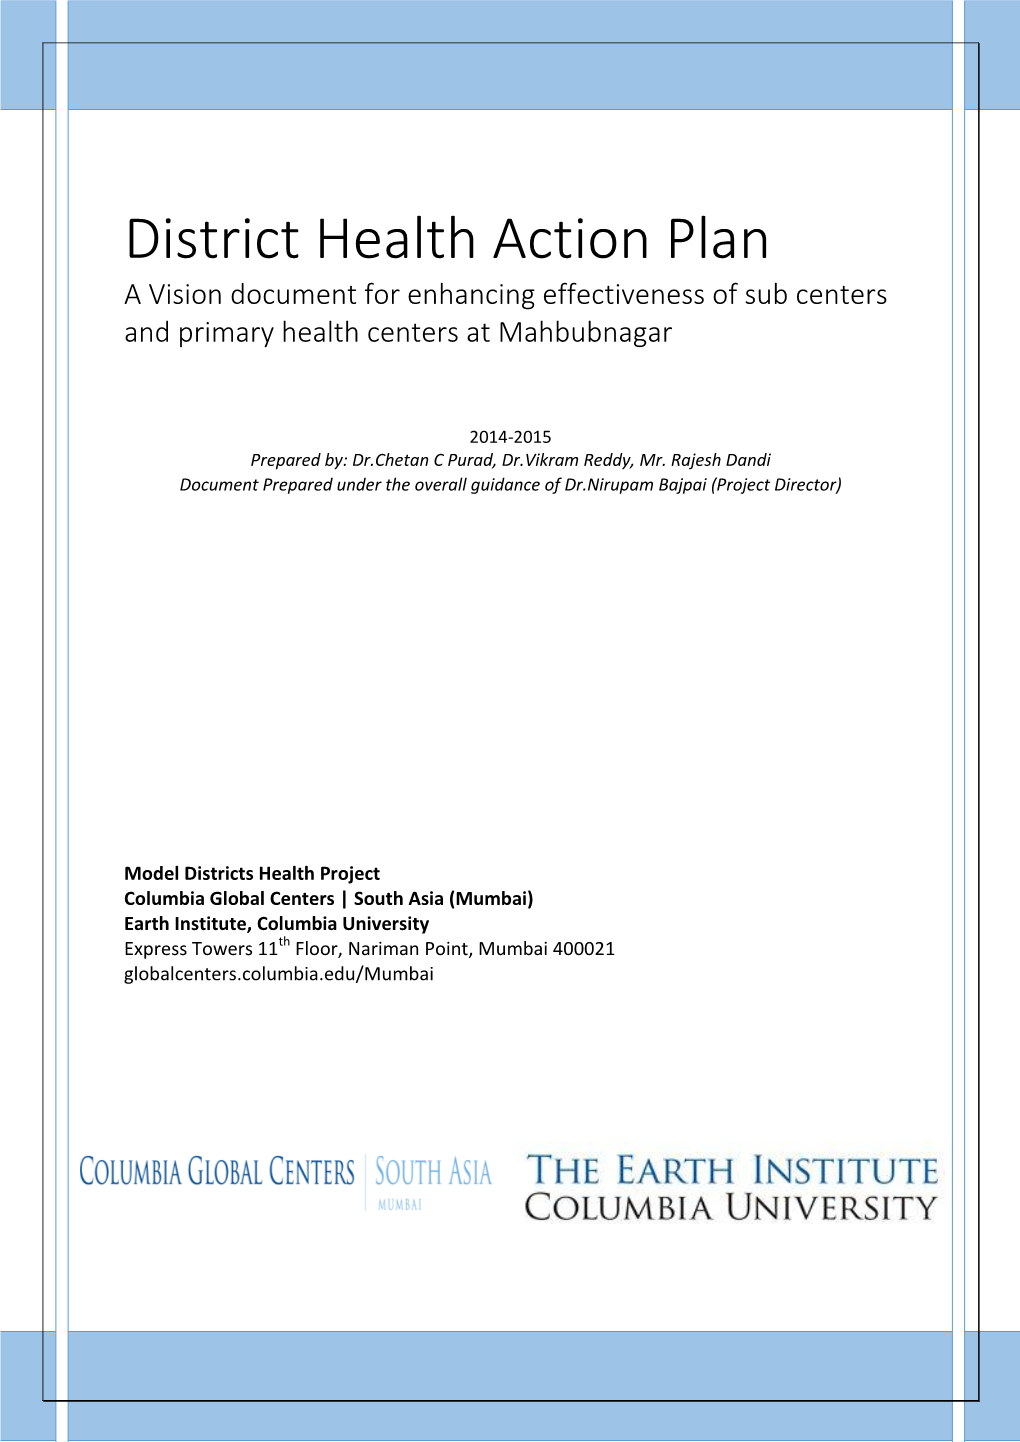 District Health Action Plan a Vision Document for Enhancing Effectiveness of Sub Centers and Primary Health Centers at Mahbubnagar